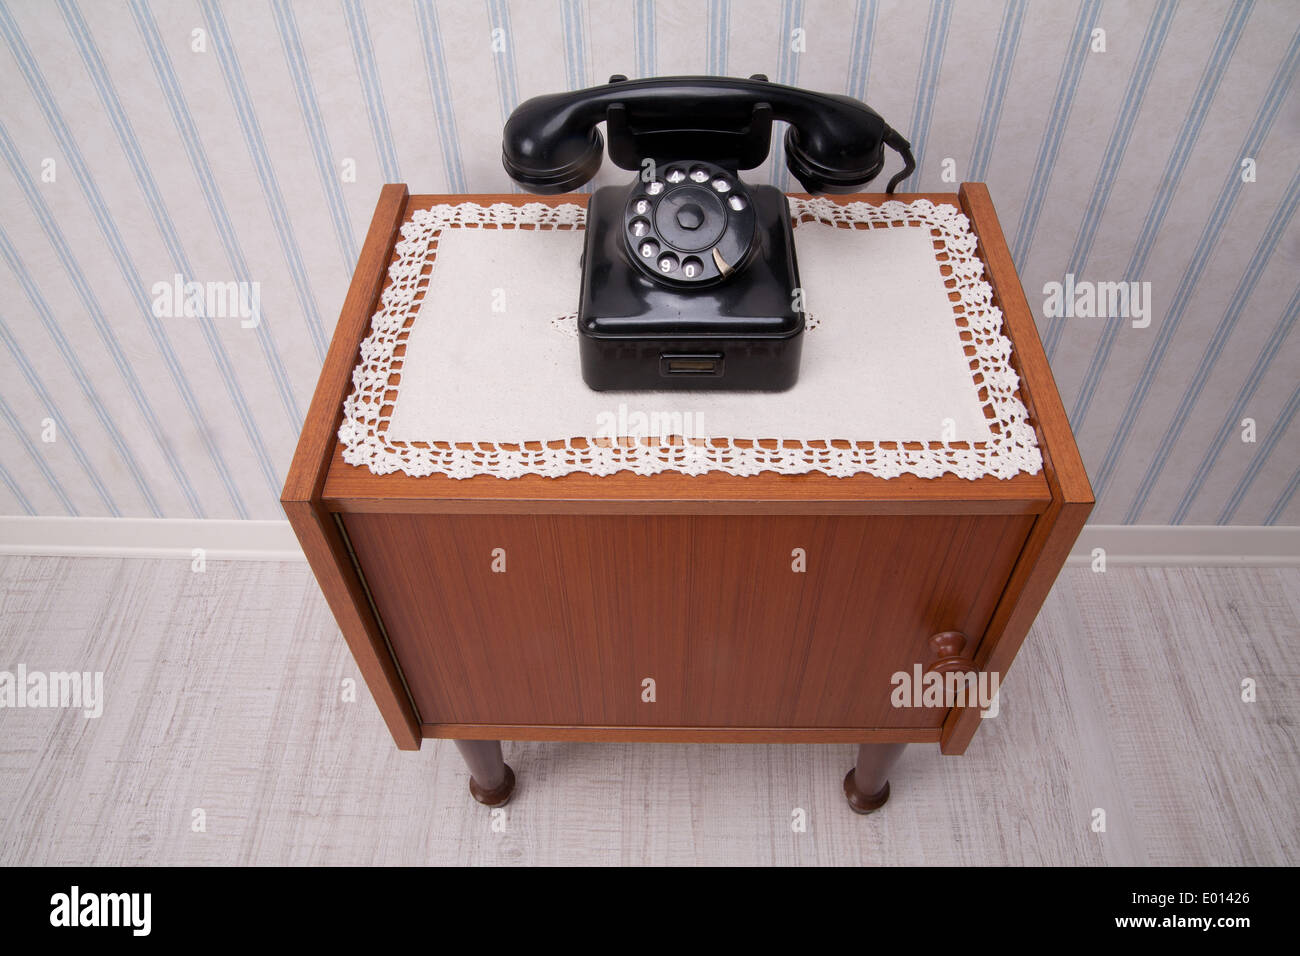 Black rotary dial telephone on a piece of furniture with old fashioned striped wallpaper Stock Photo